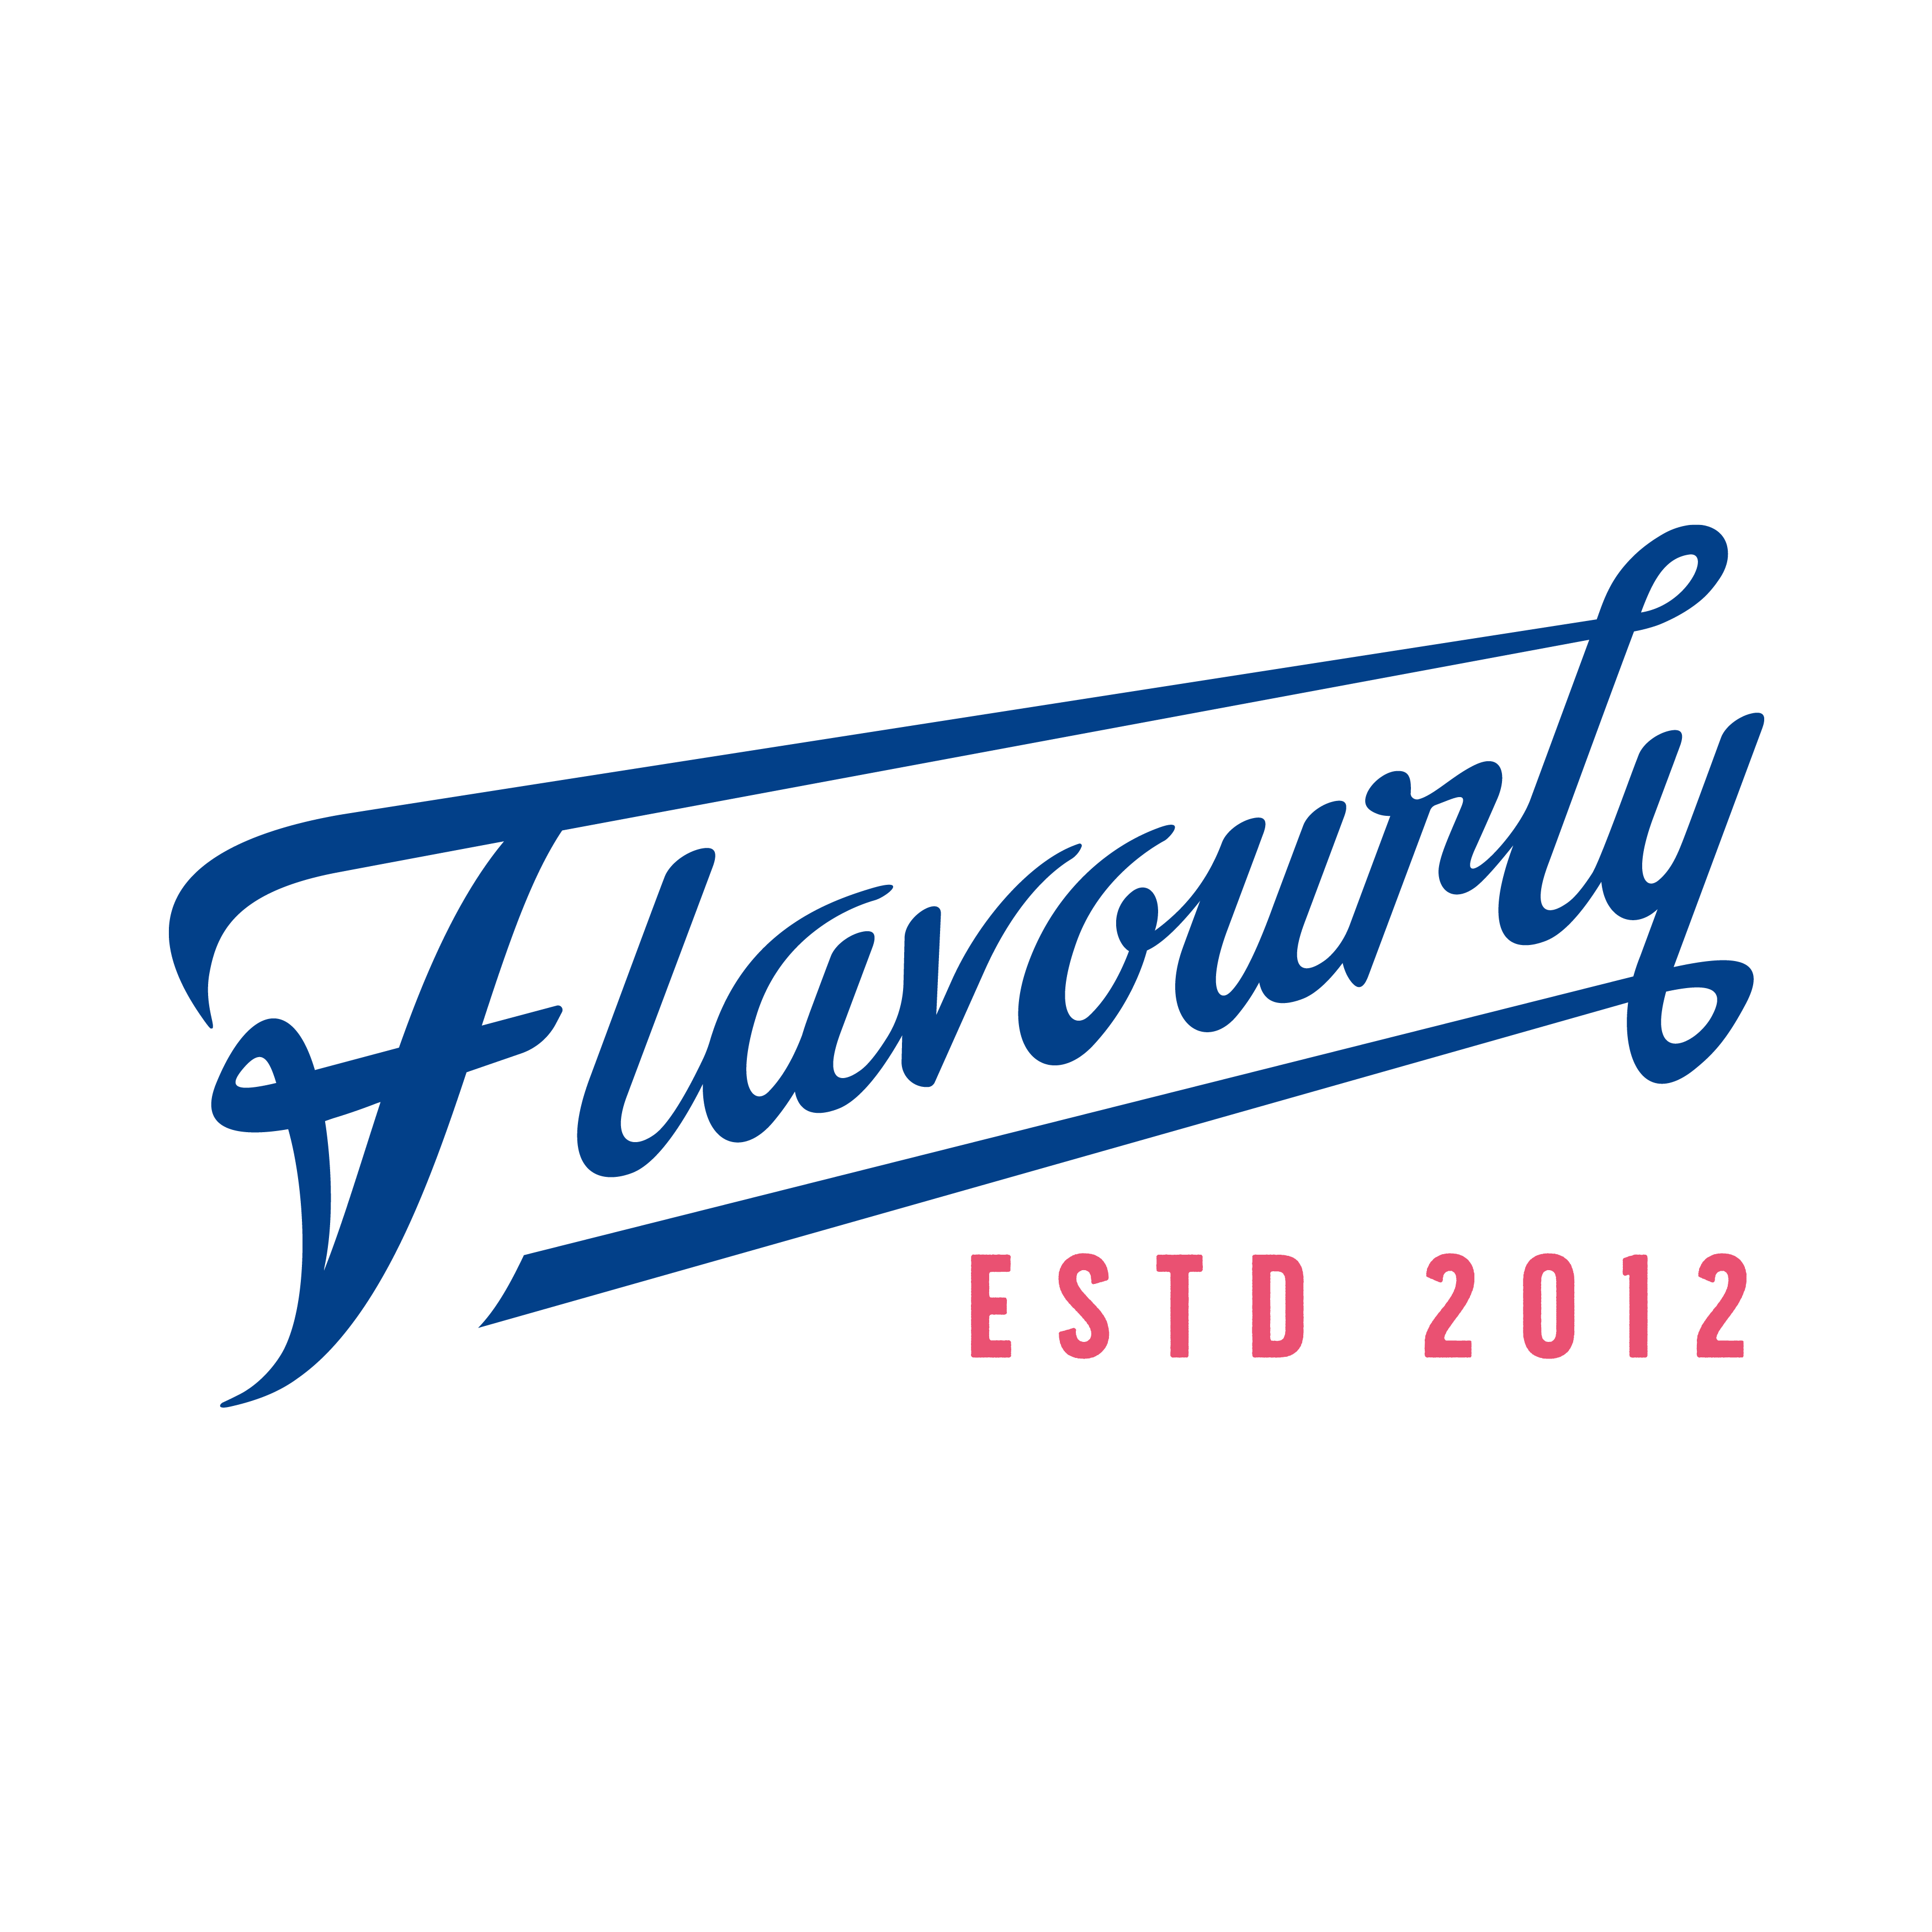 Flavourly Coupons & Promo Codes